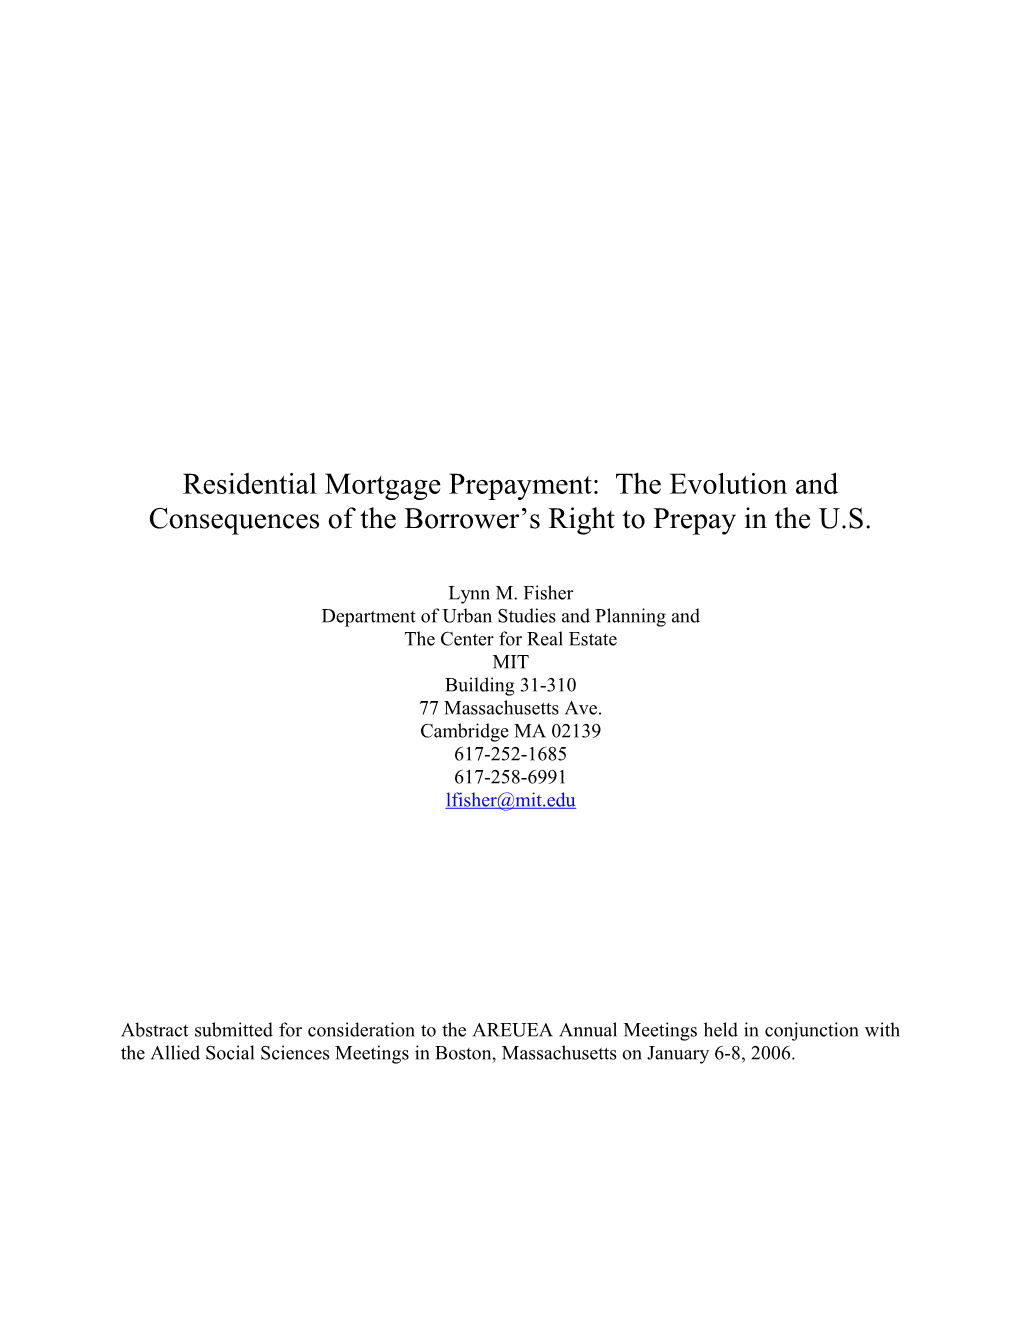 Residential Mortgage Prepayment: Modern Norms and Consequences